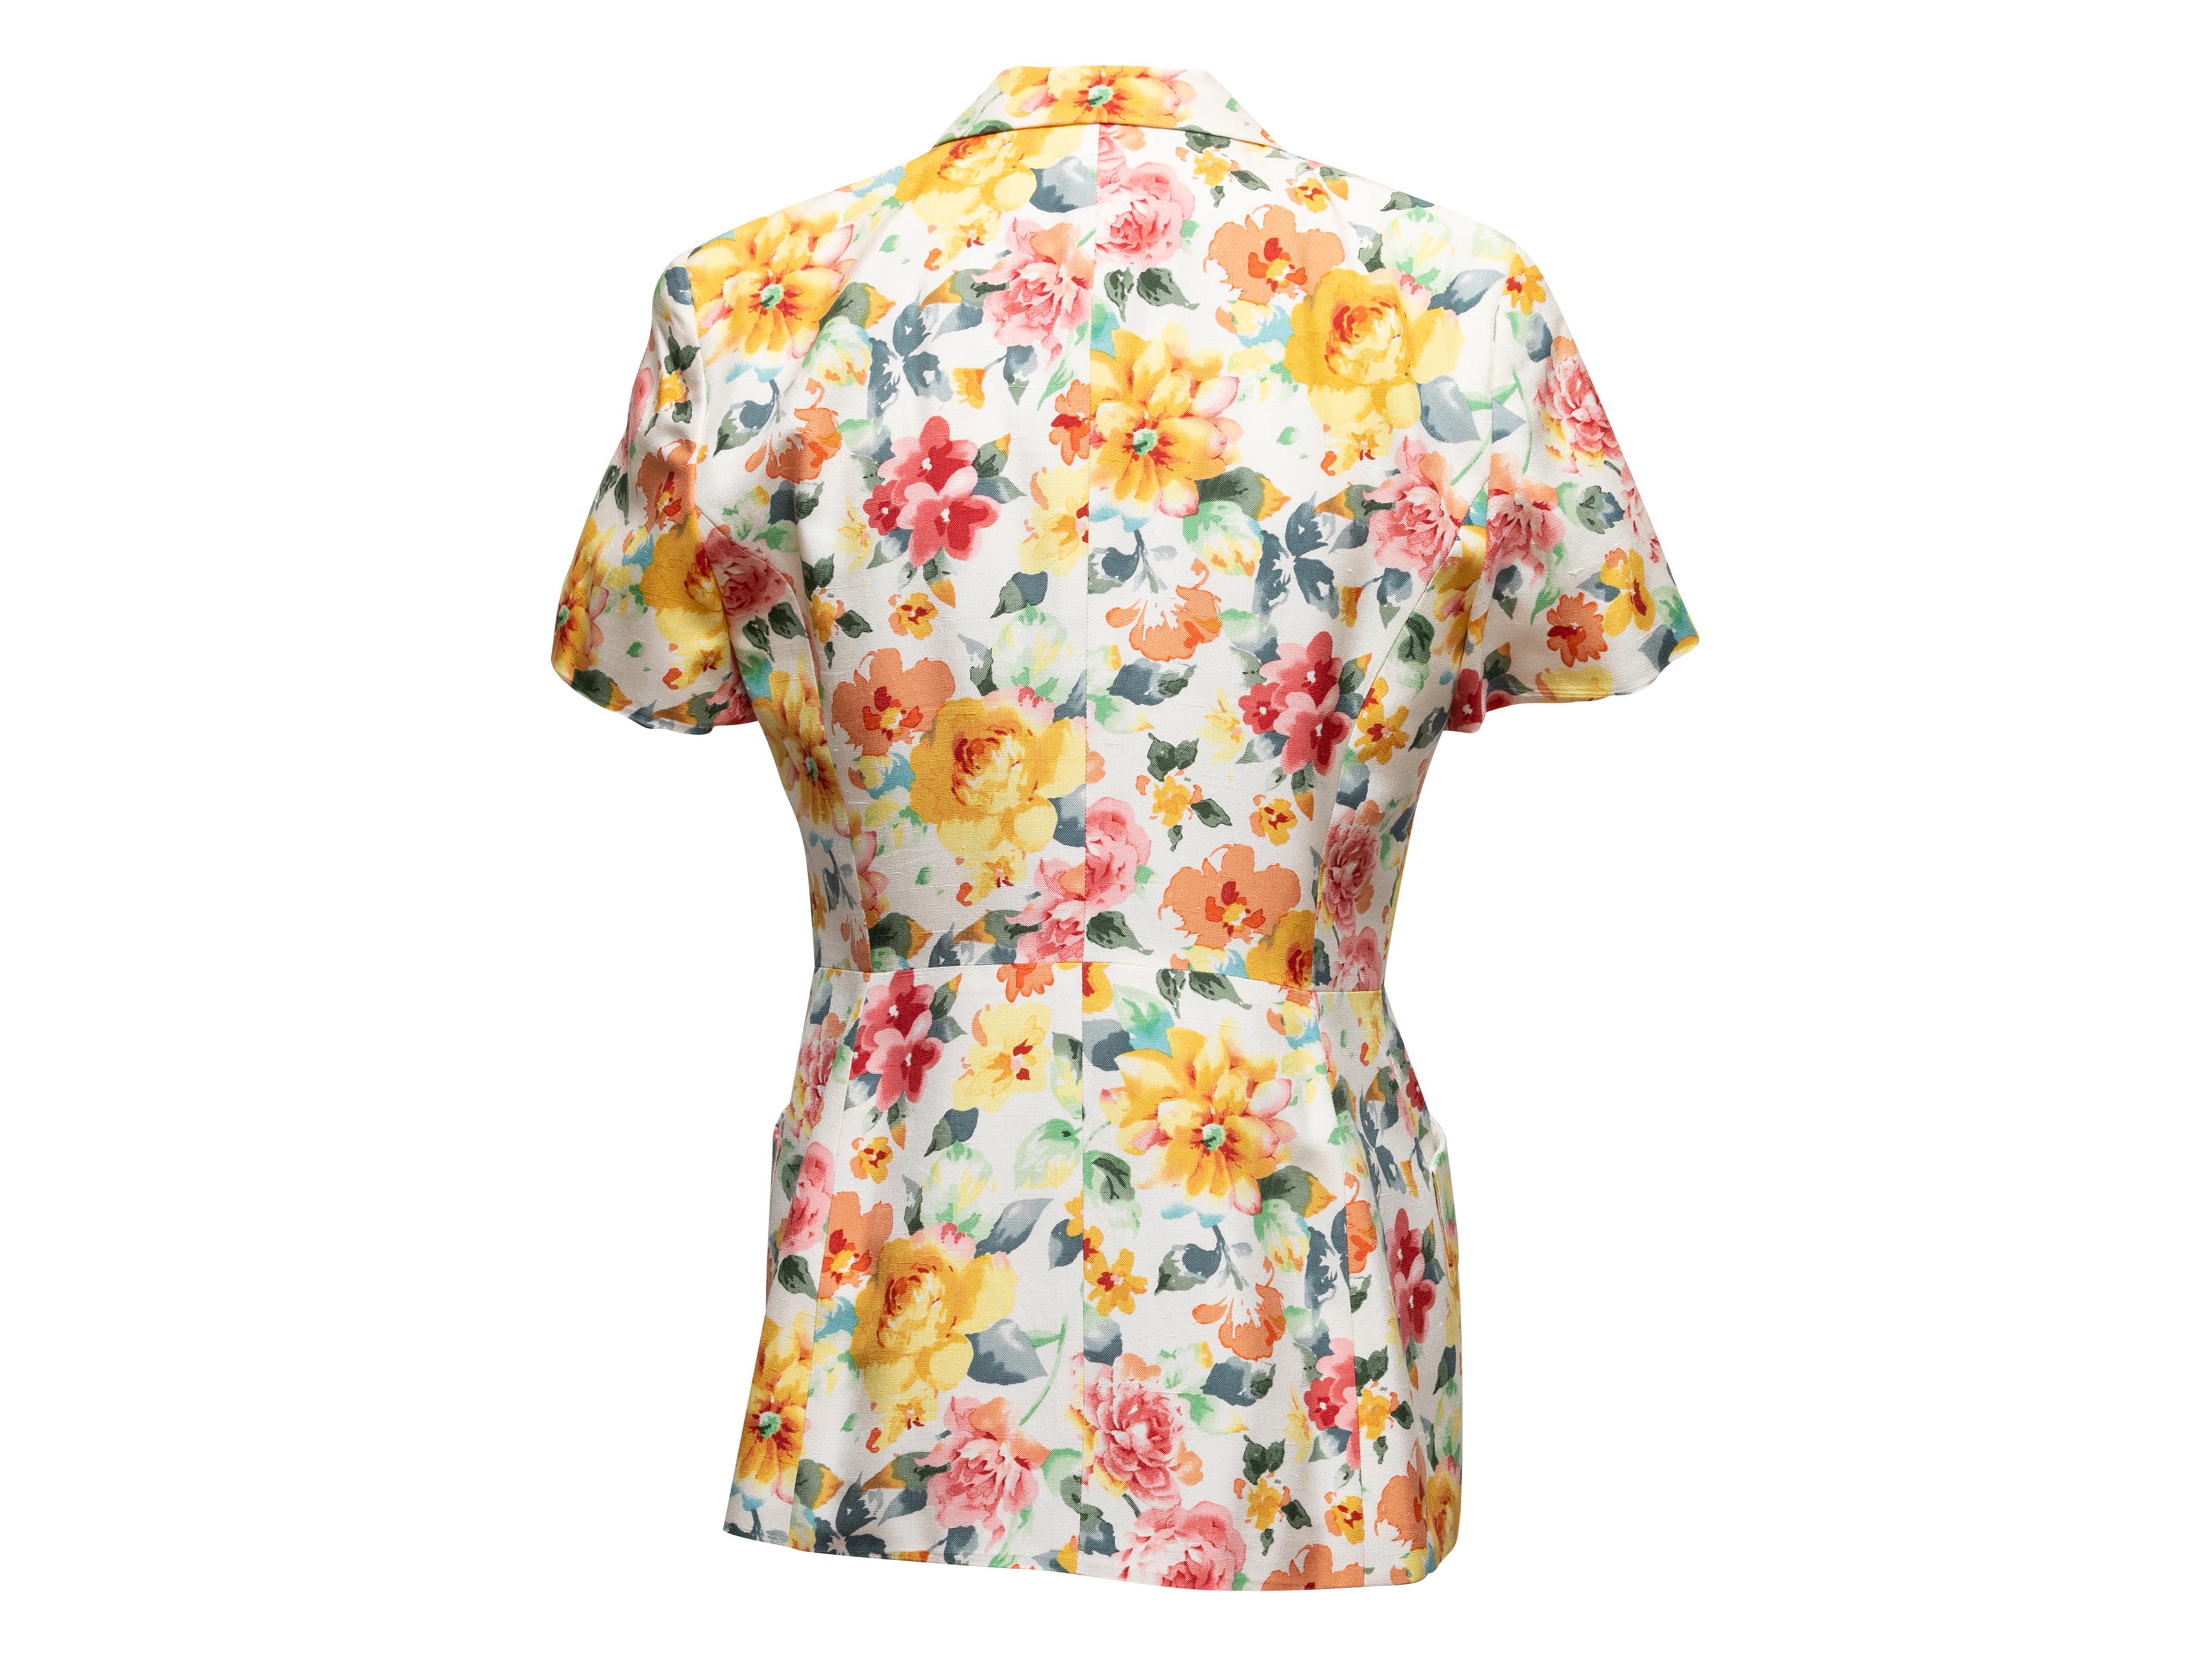 Women's White & Multicolor Christian Dior Floral Print Short Sleeve Jacket Size US 8